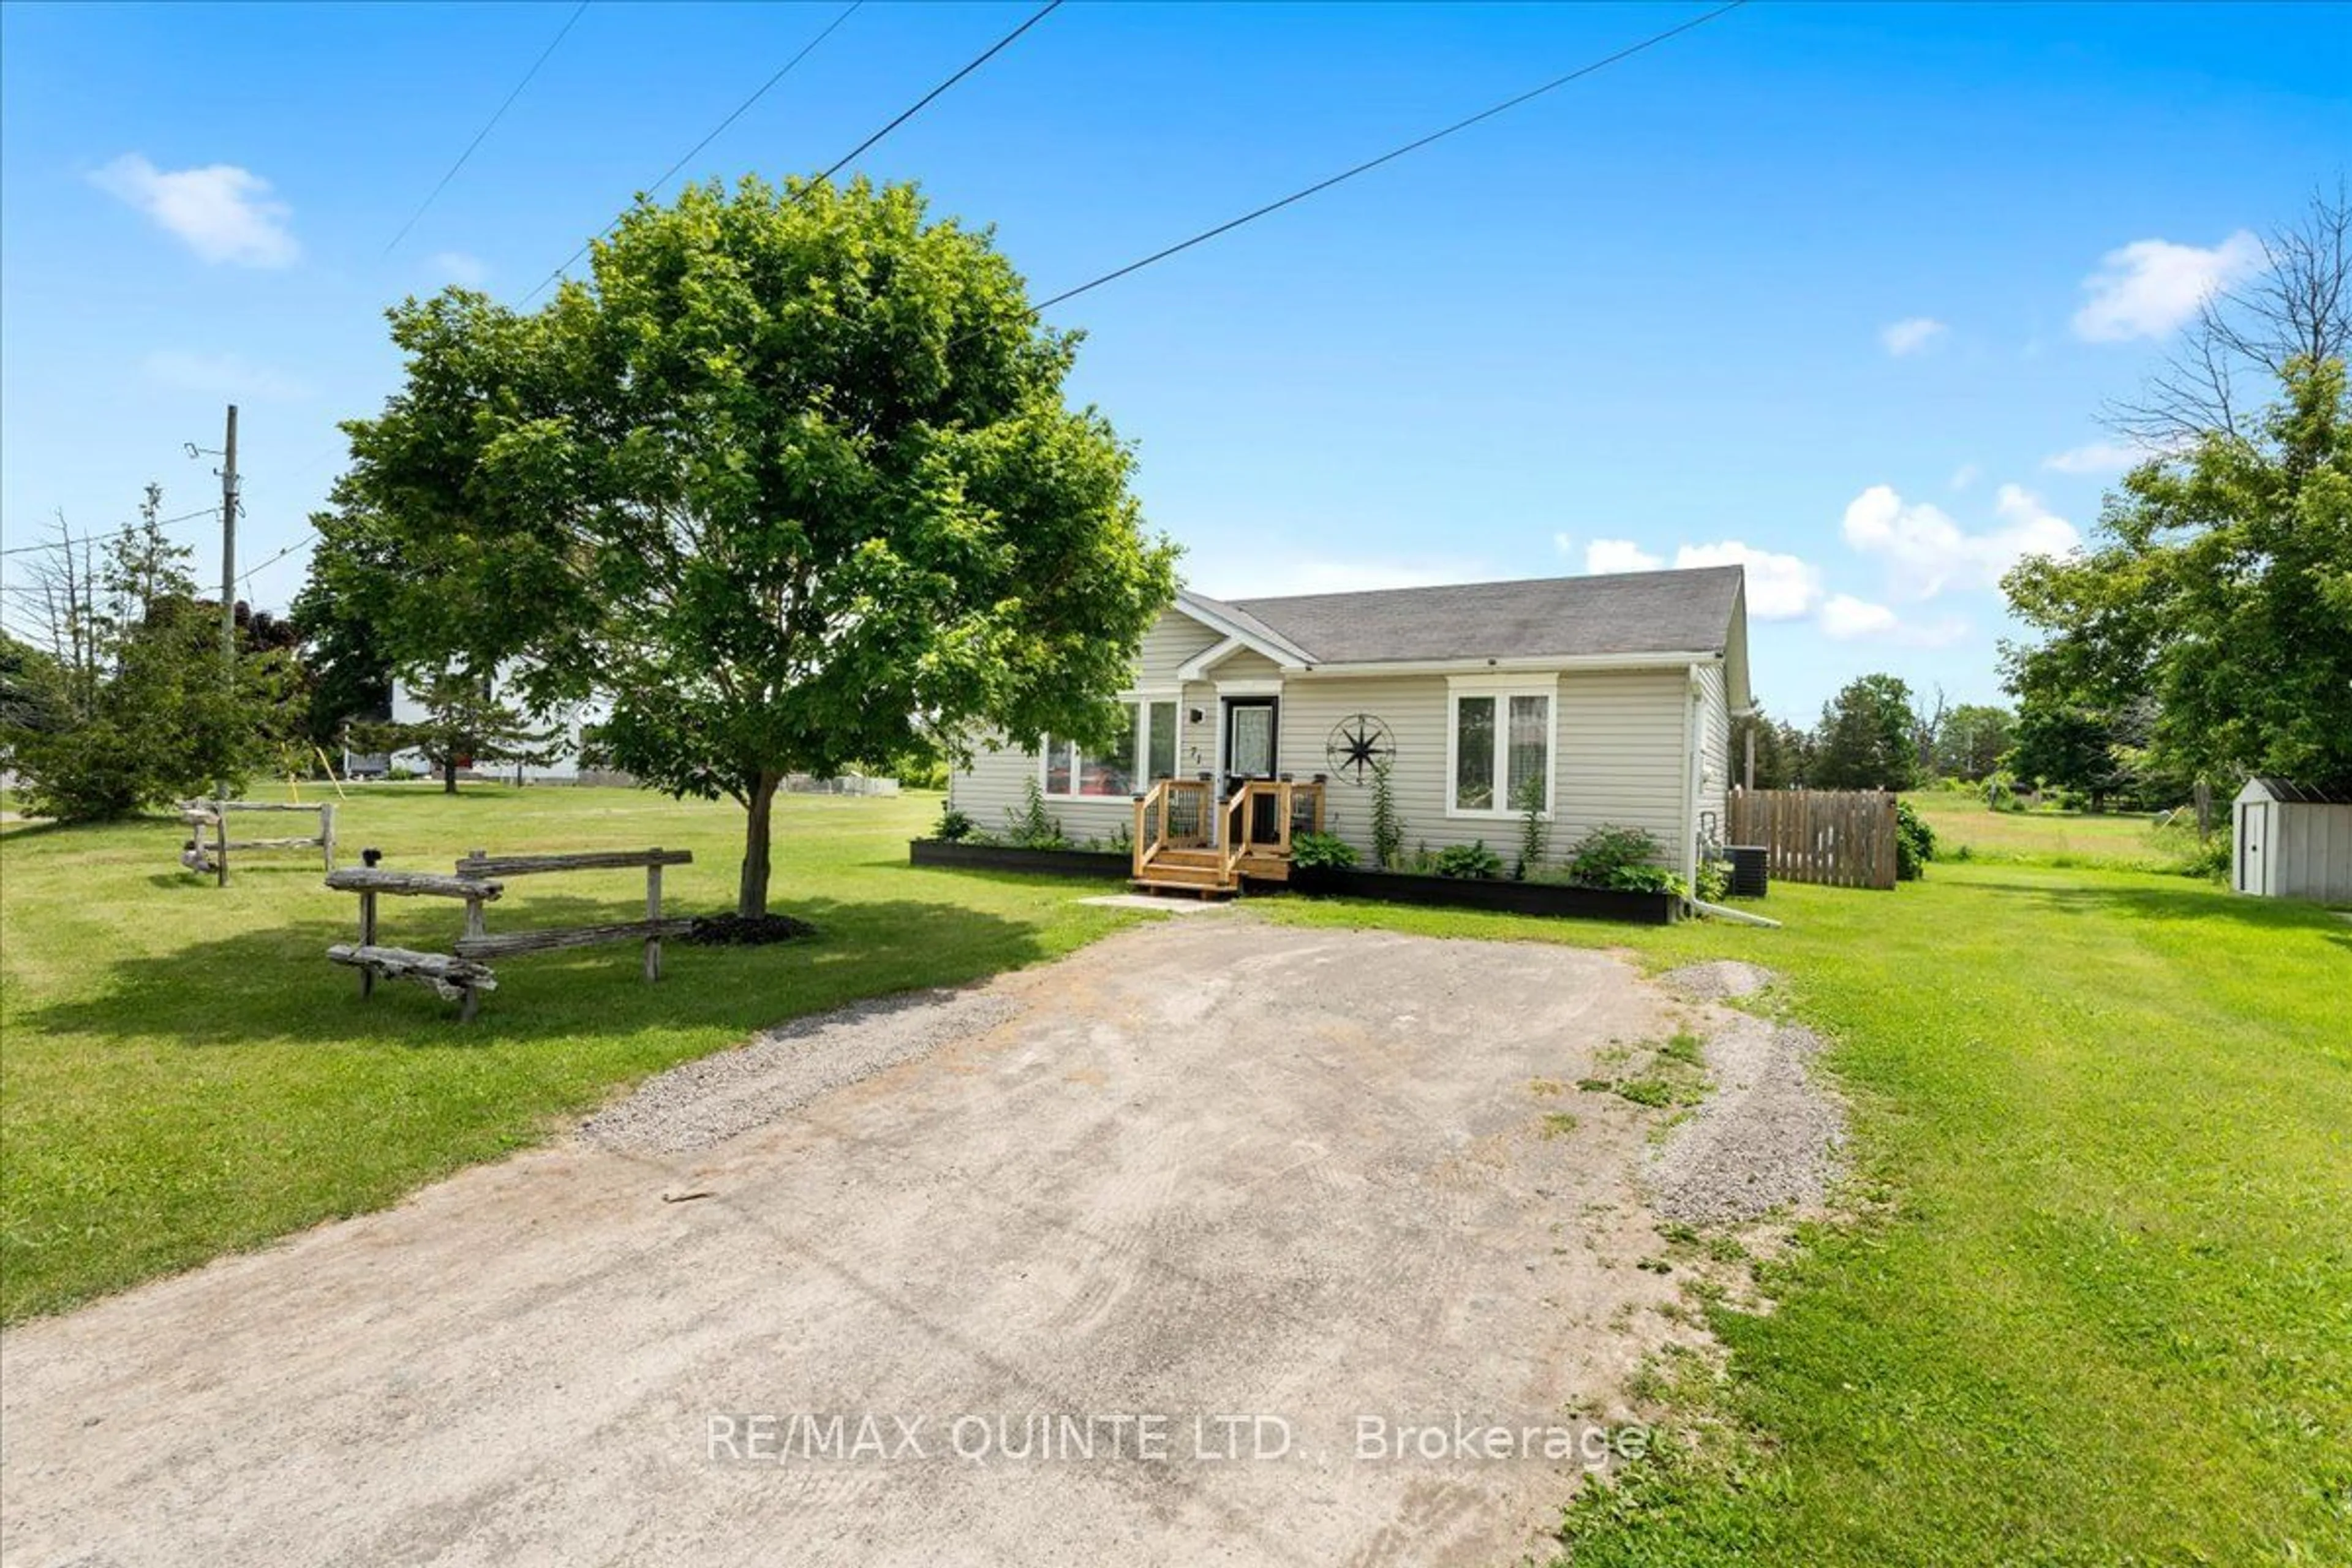 Cottage for 71 London Ave, Prince Edward County Ontario K0K 2T0